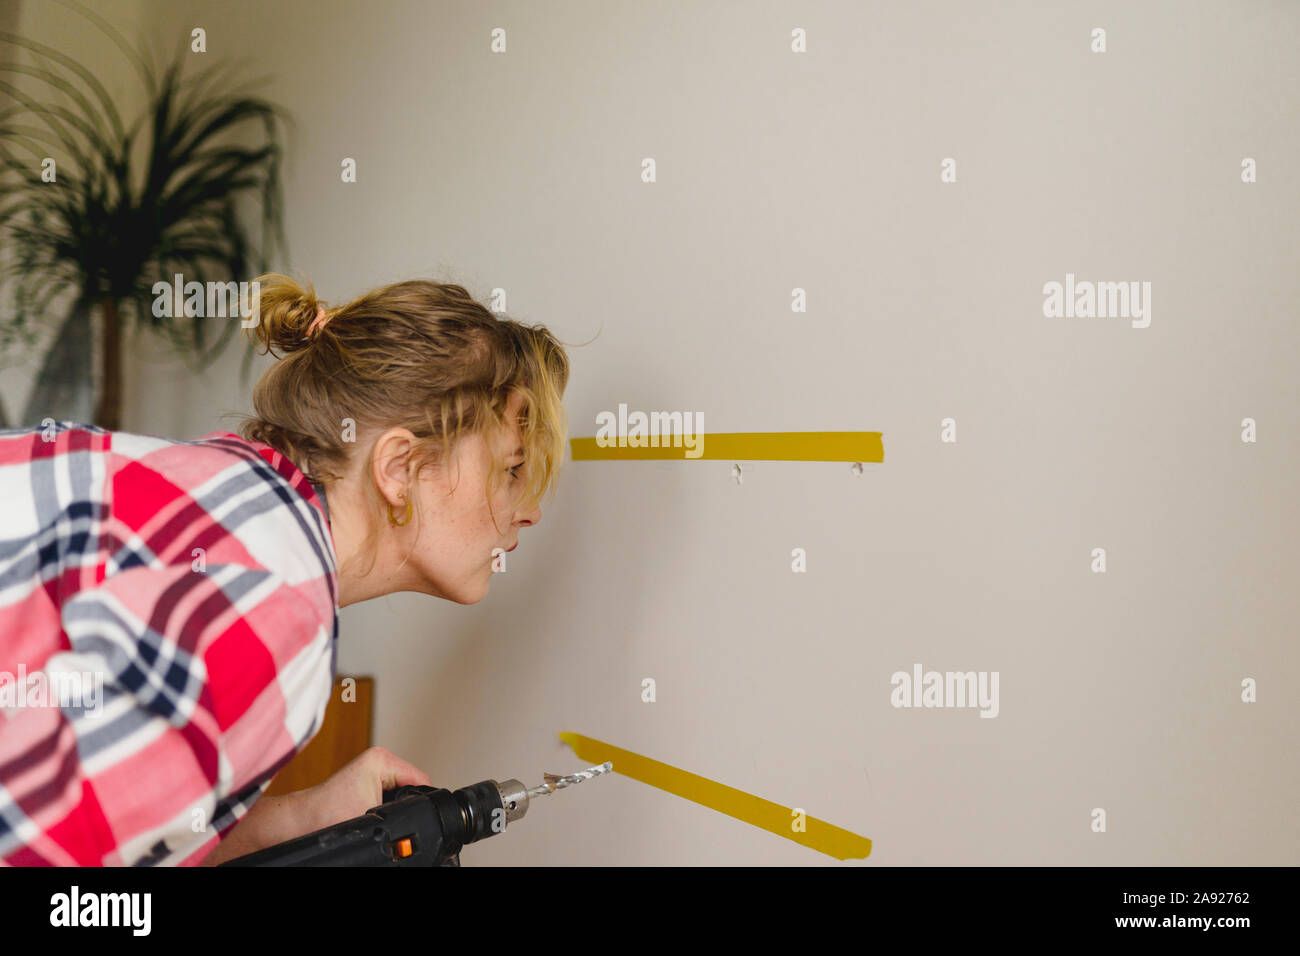 Woman with electric drill Stock Photo